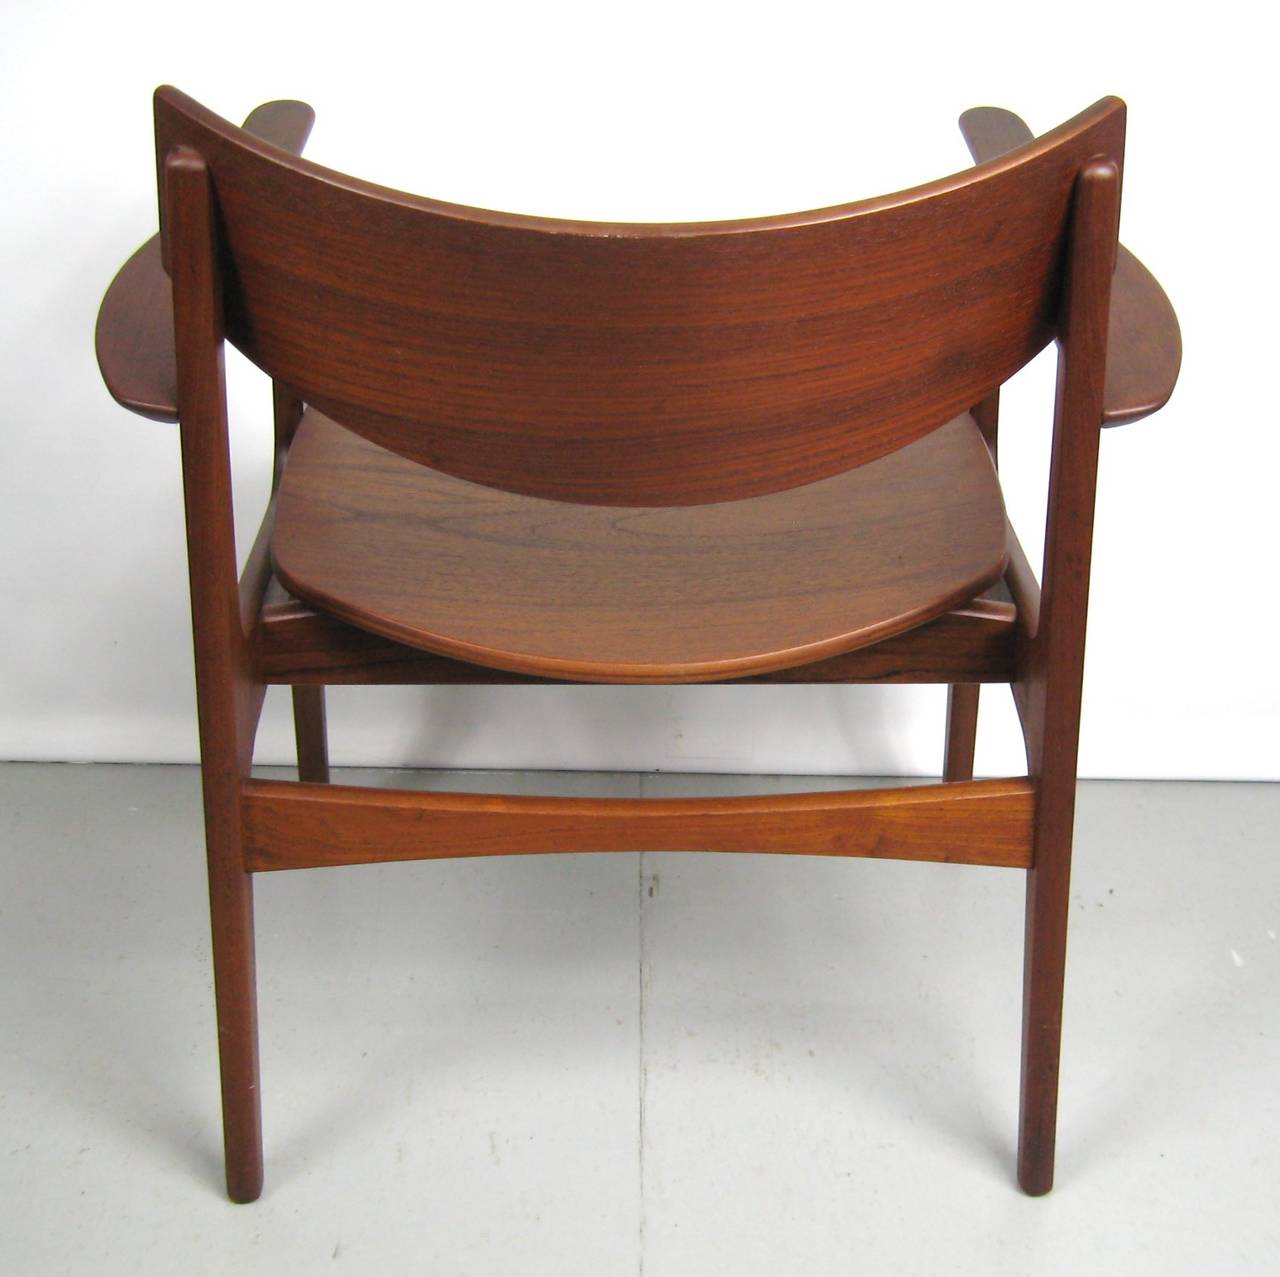 Mid-20th Century Teak Danish Modern Dining Room Table with Ten Chairs by Erik Buck